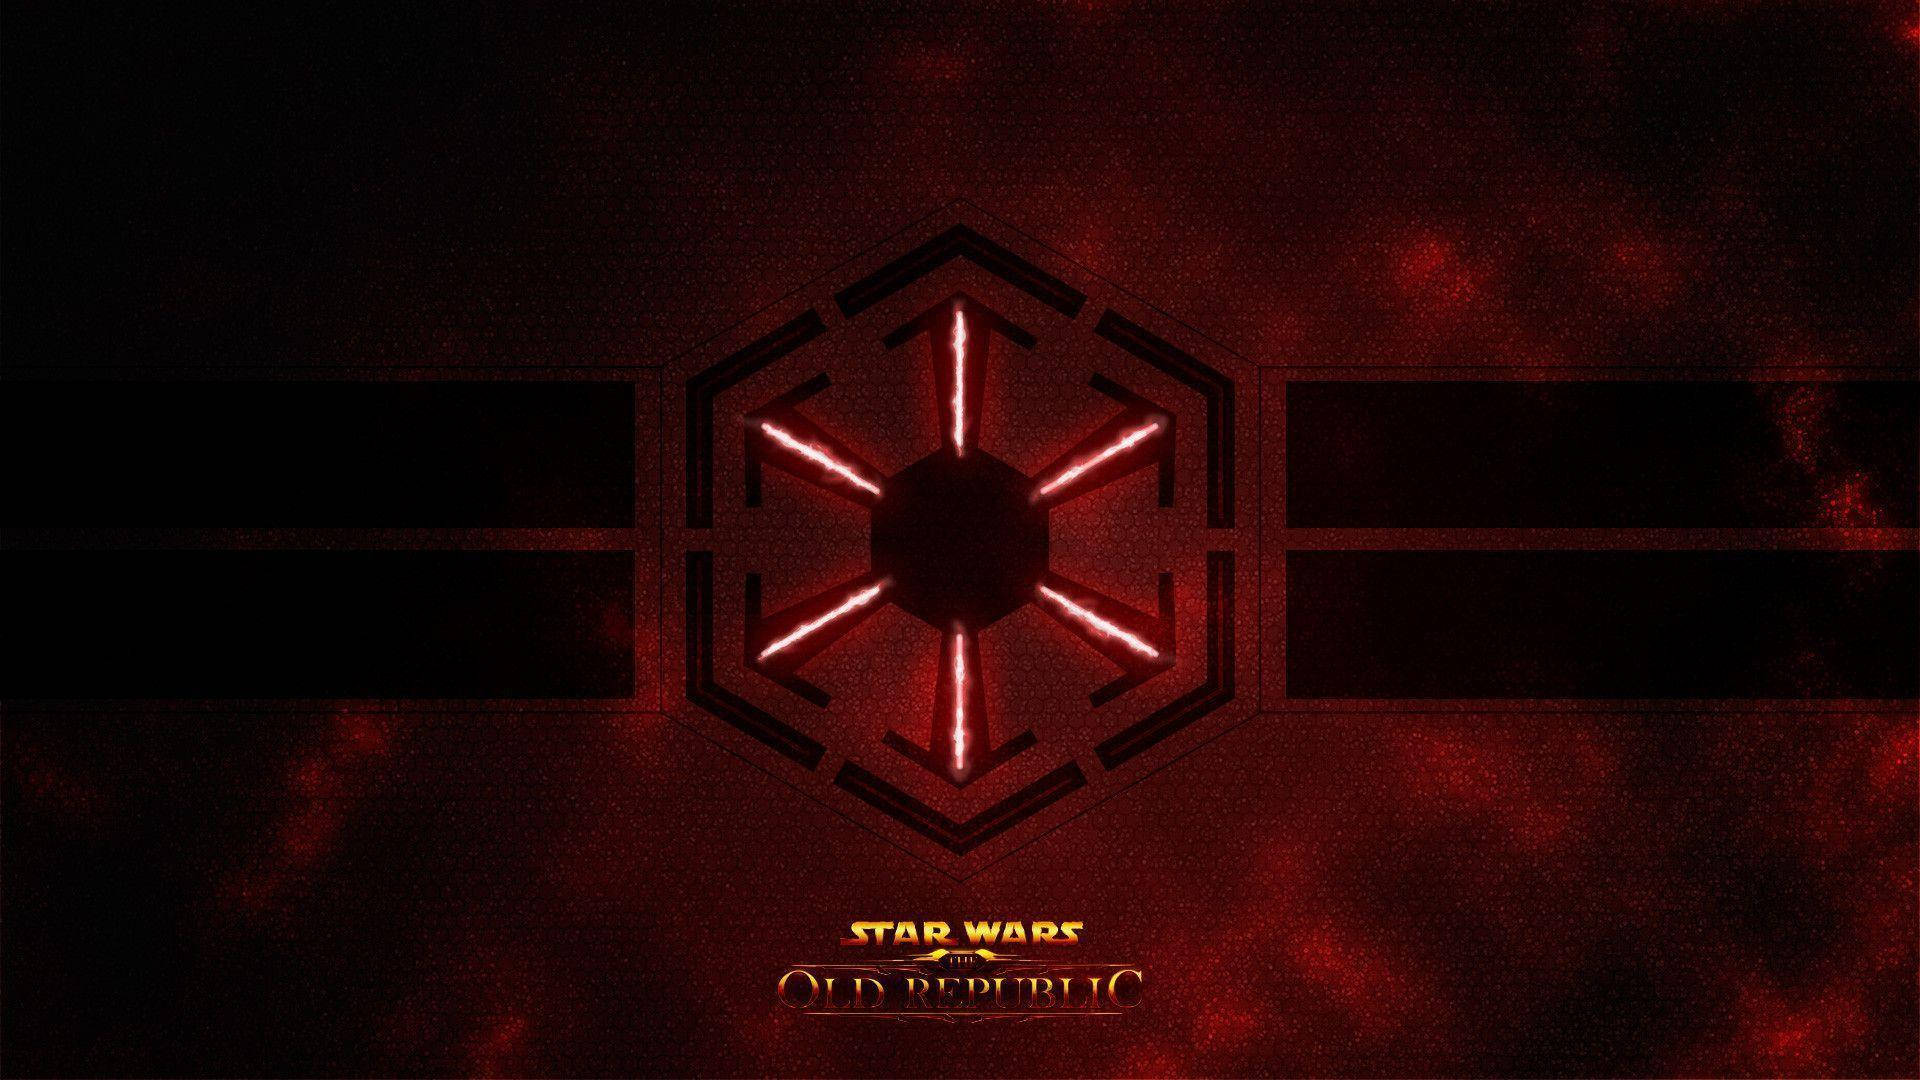 Experience the dark power of the Sith Wallpaper